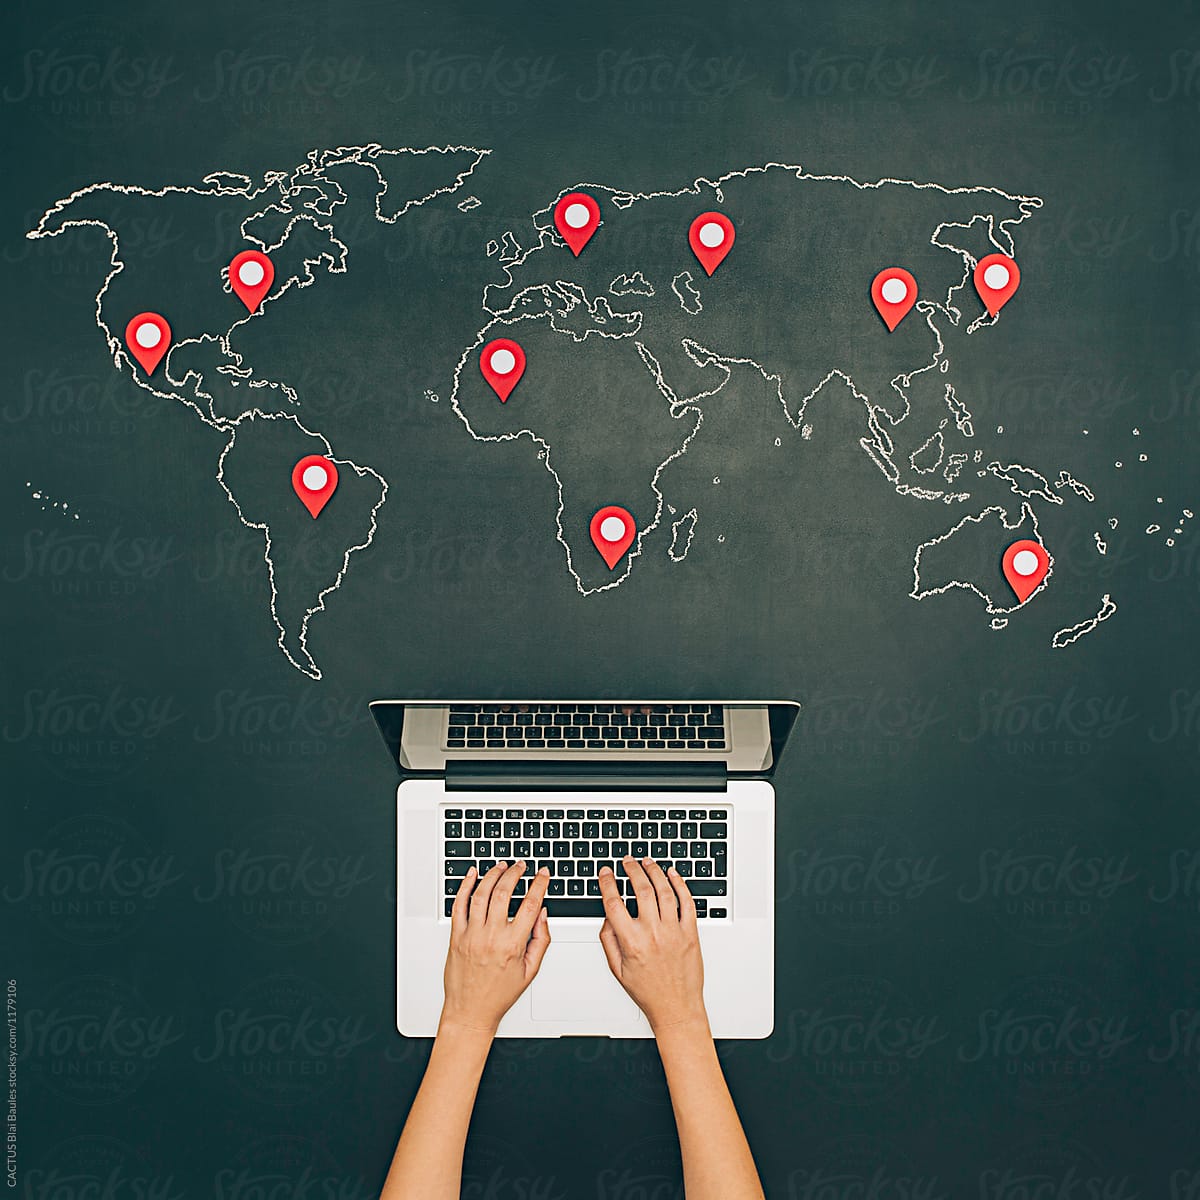 Internet search with notebook. World map on chalkboard with pins.